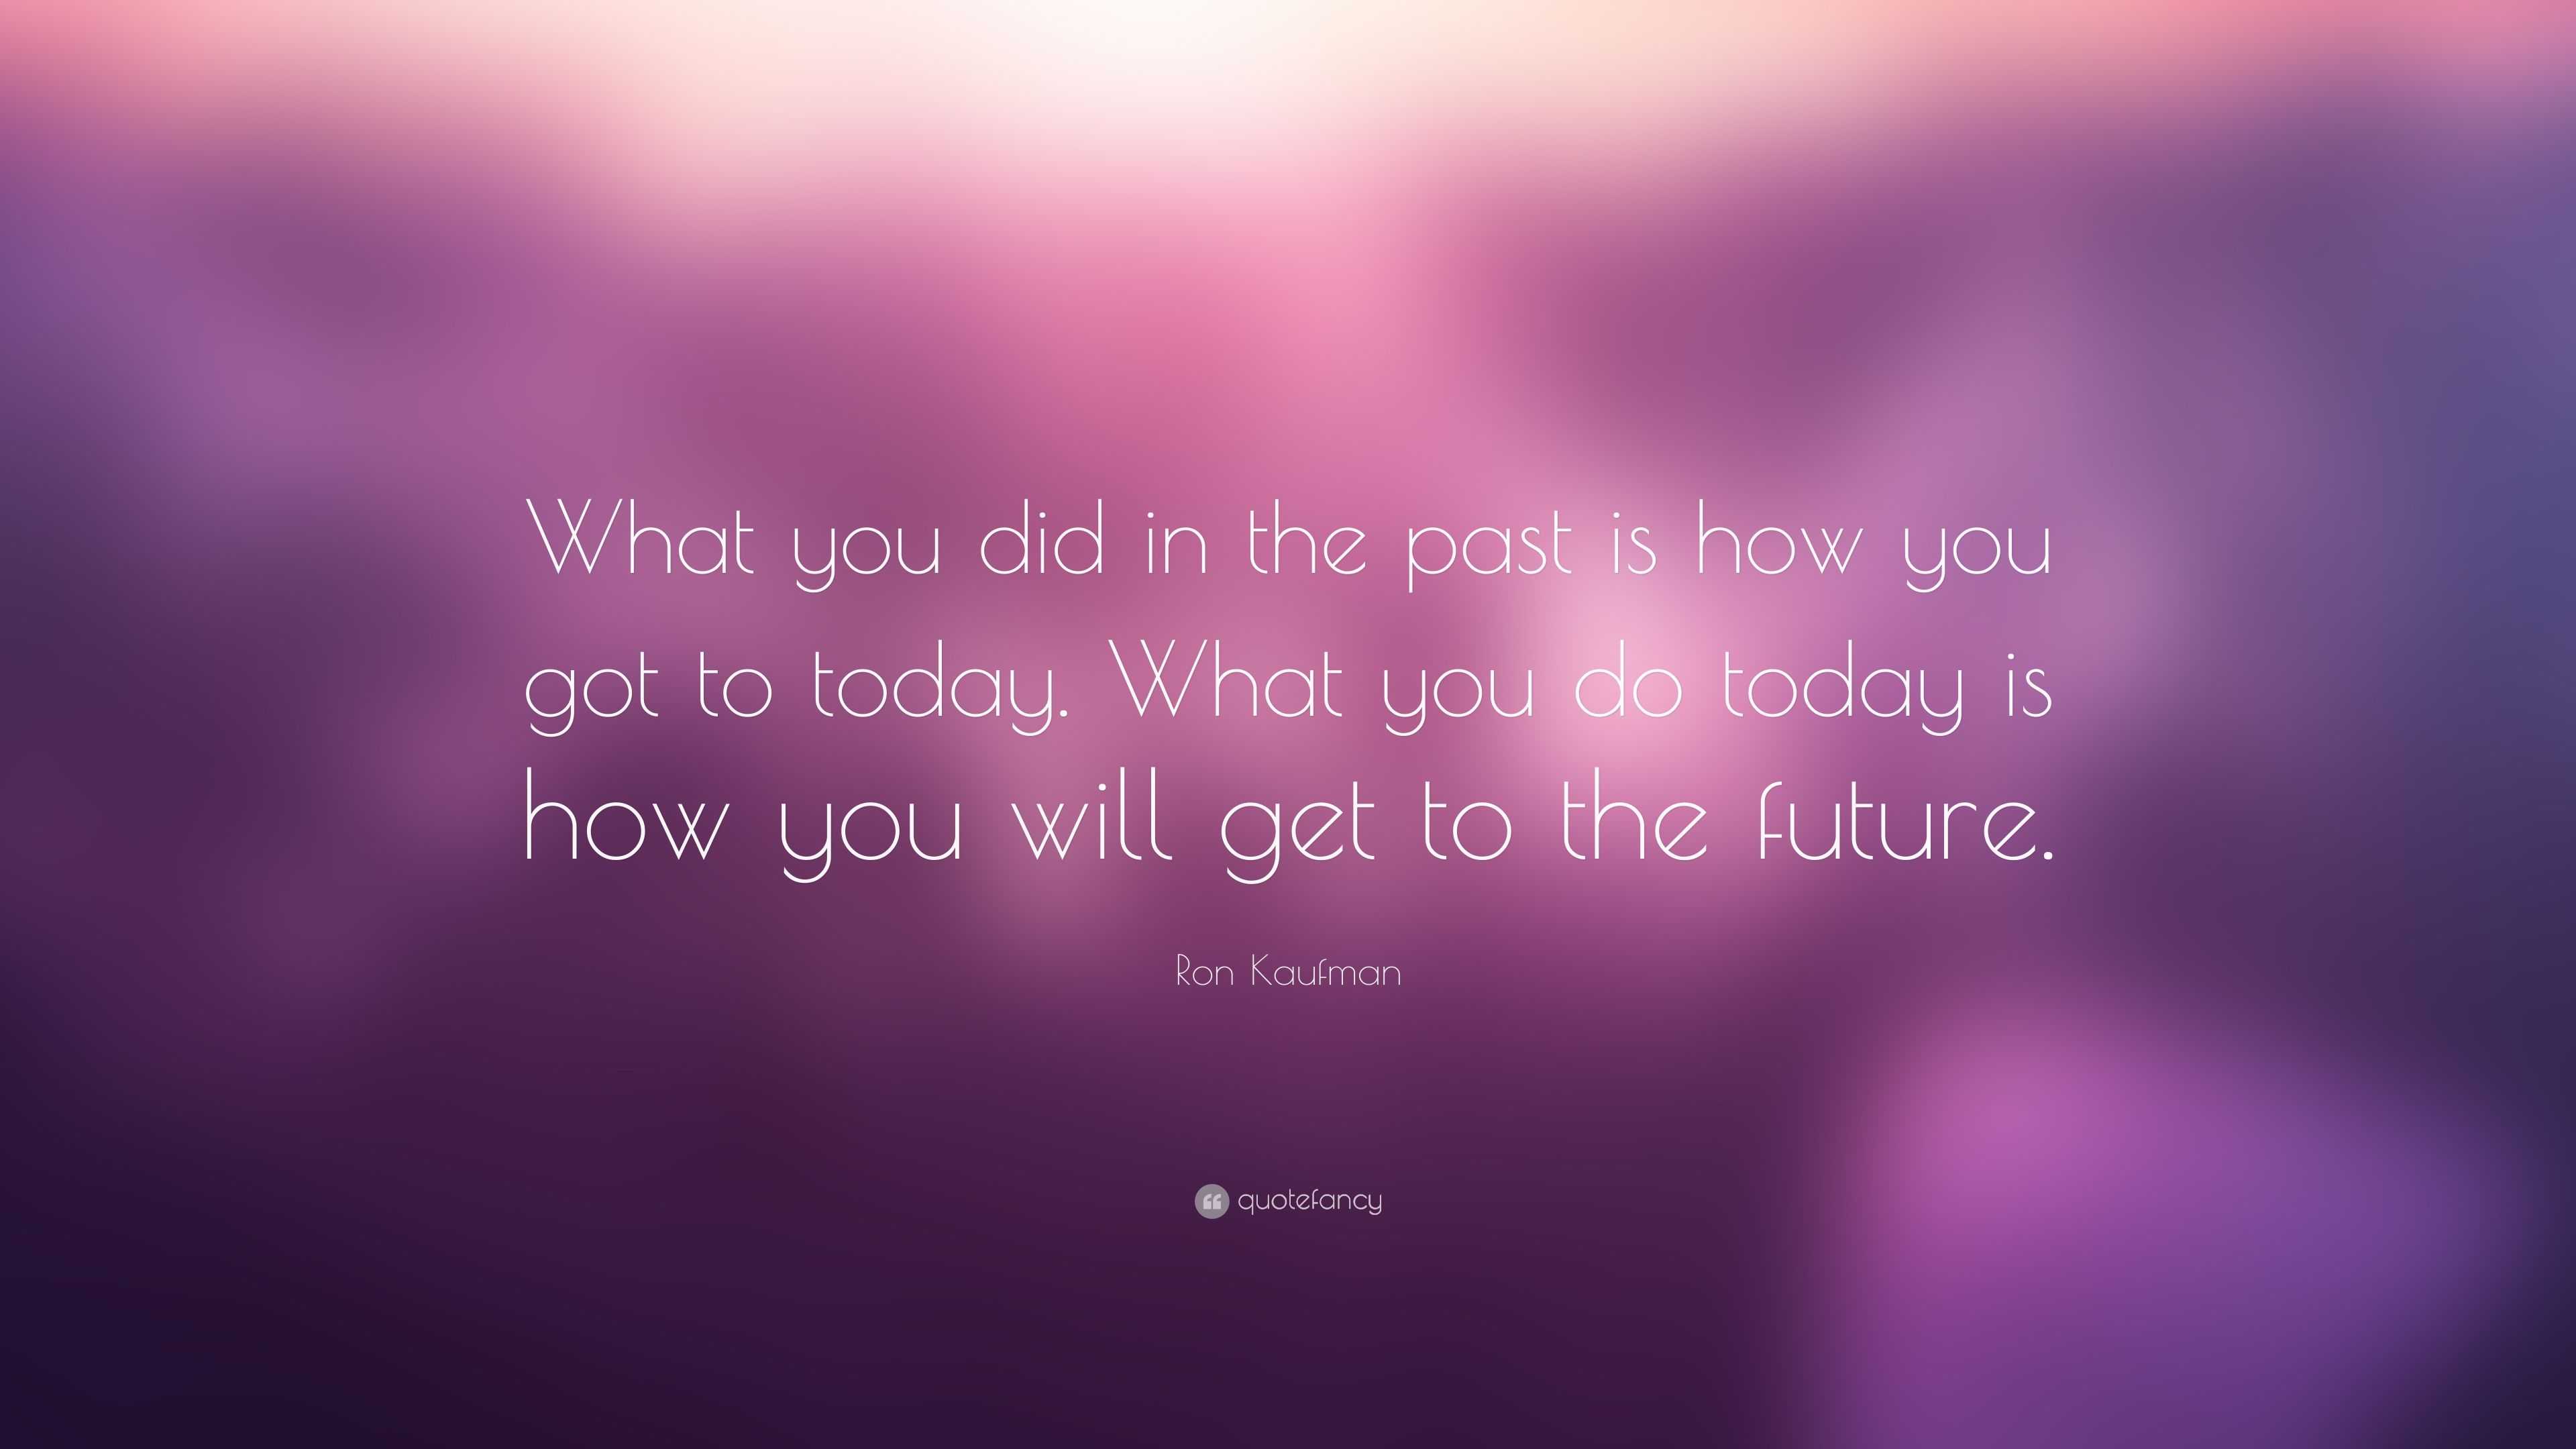 Ron Kaufman Quote: “What you did in the past is how you got to today ...